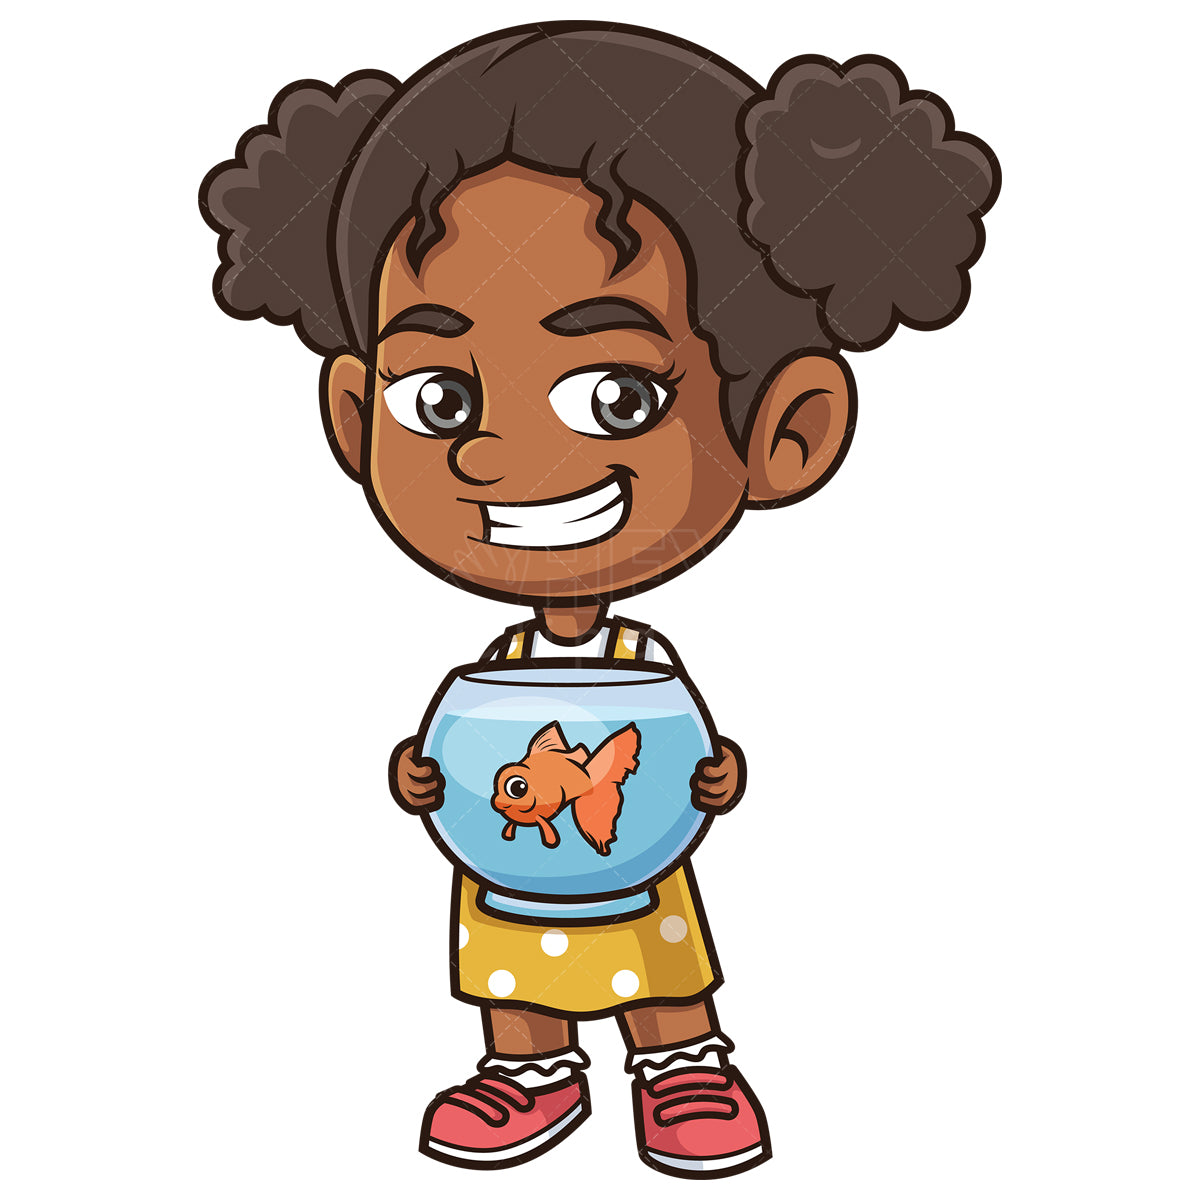 Royalty-free stock vector illustration of an african-american girl with fish bowl.